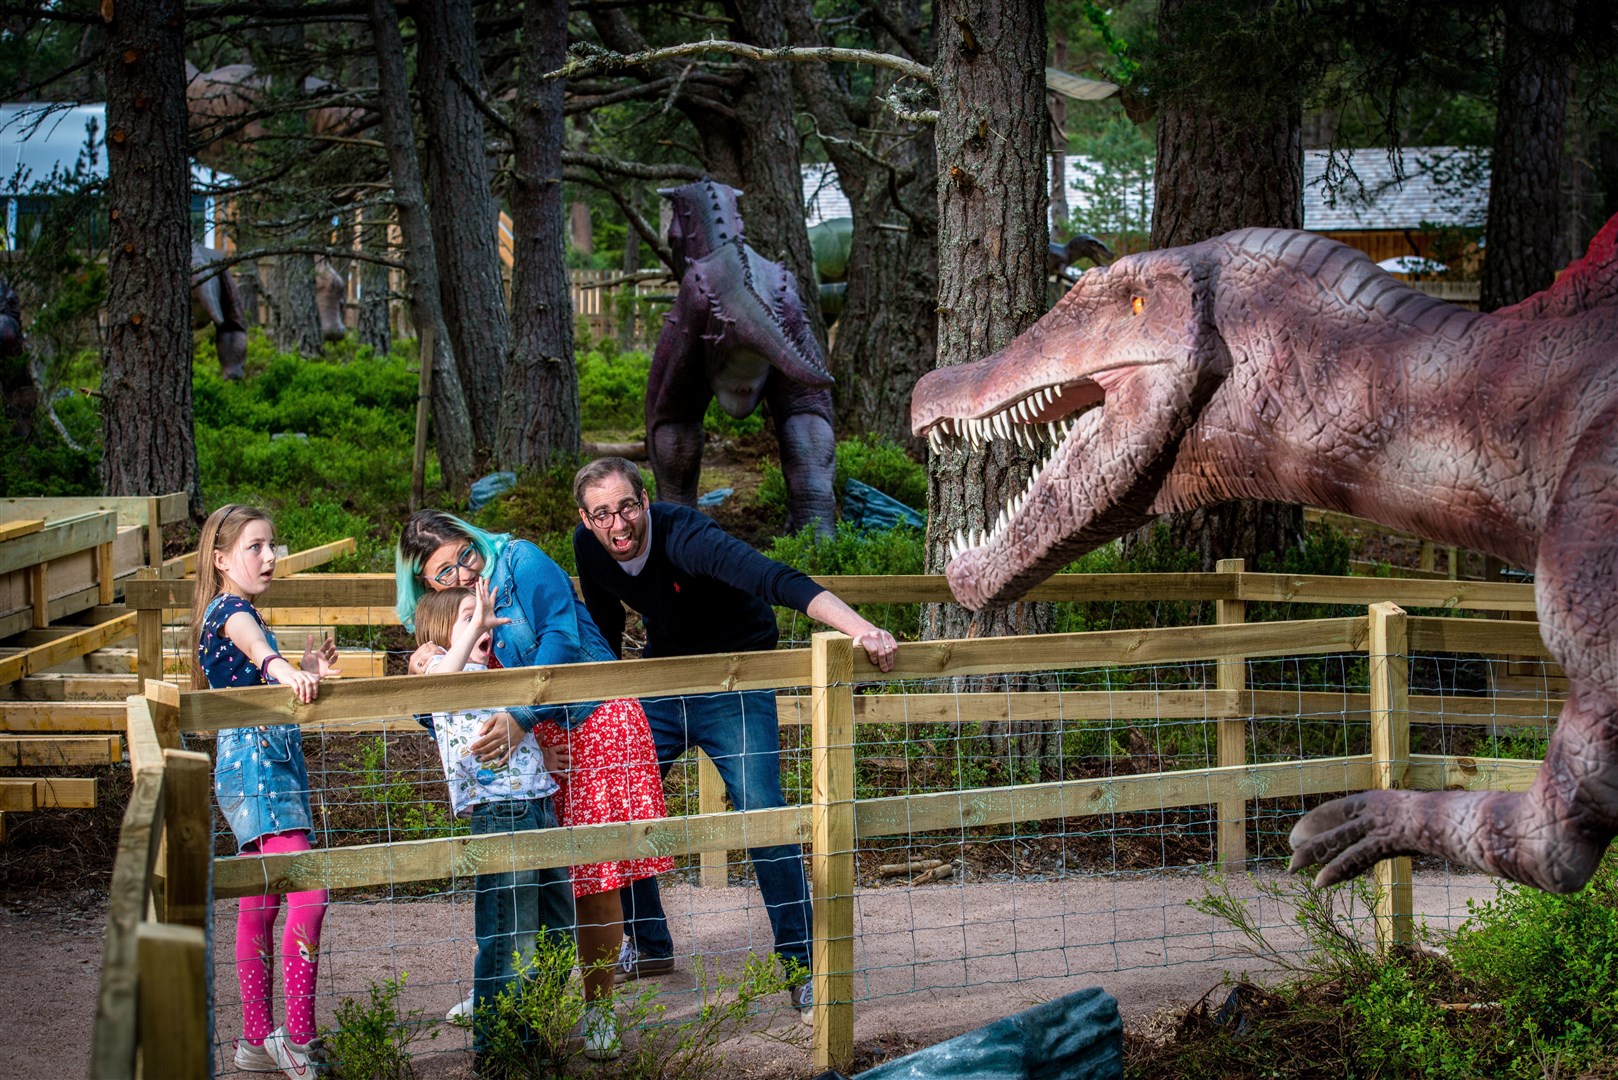 Dinosaur World, one of the most popular attractions at Landmark Forest Adventure Park, will be making a roaring return.